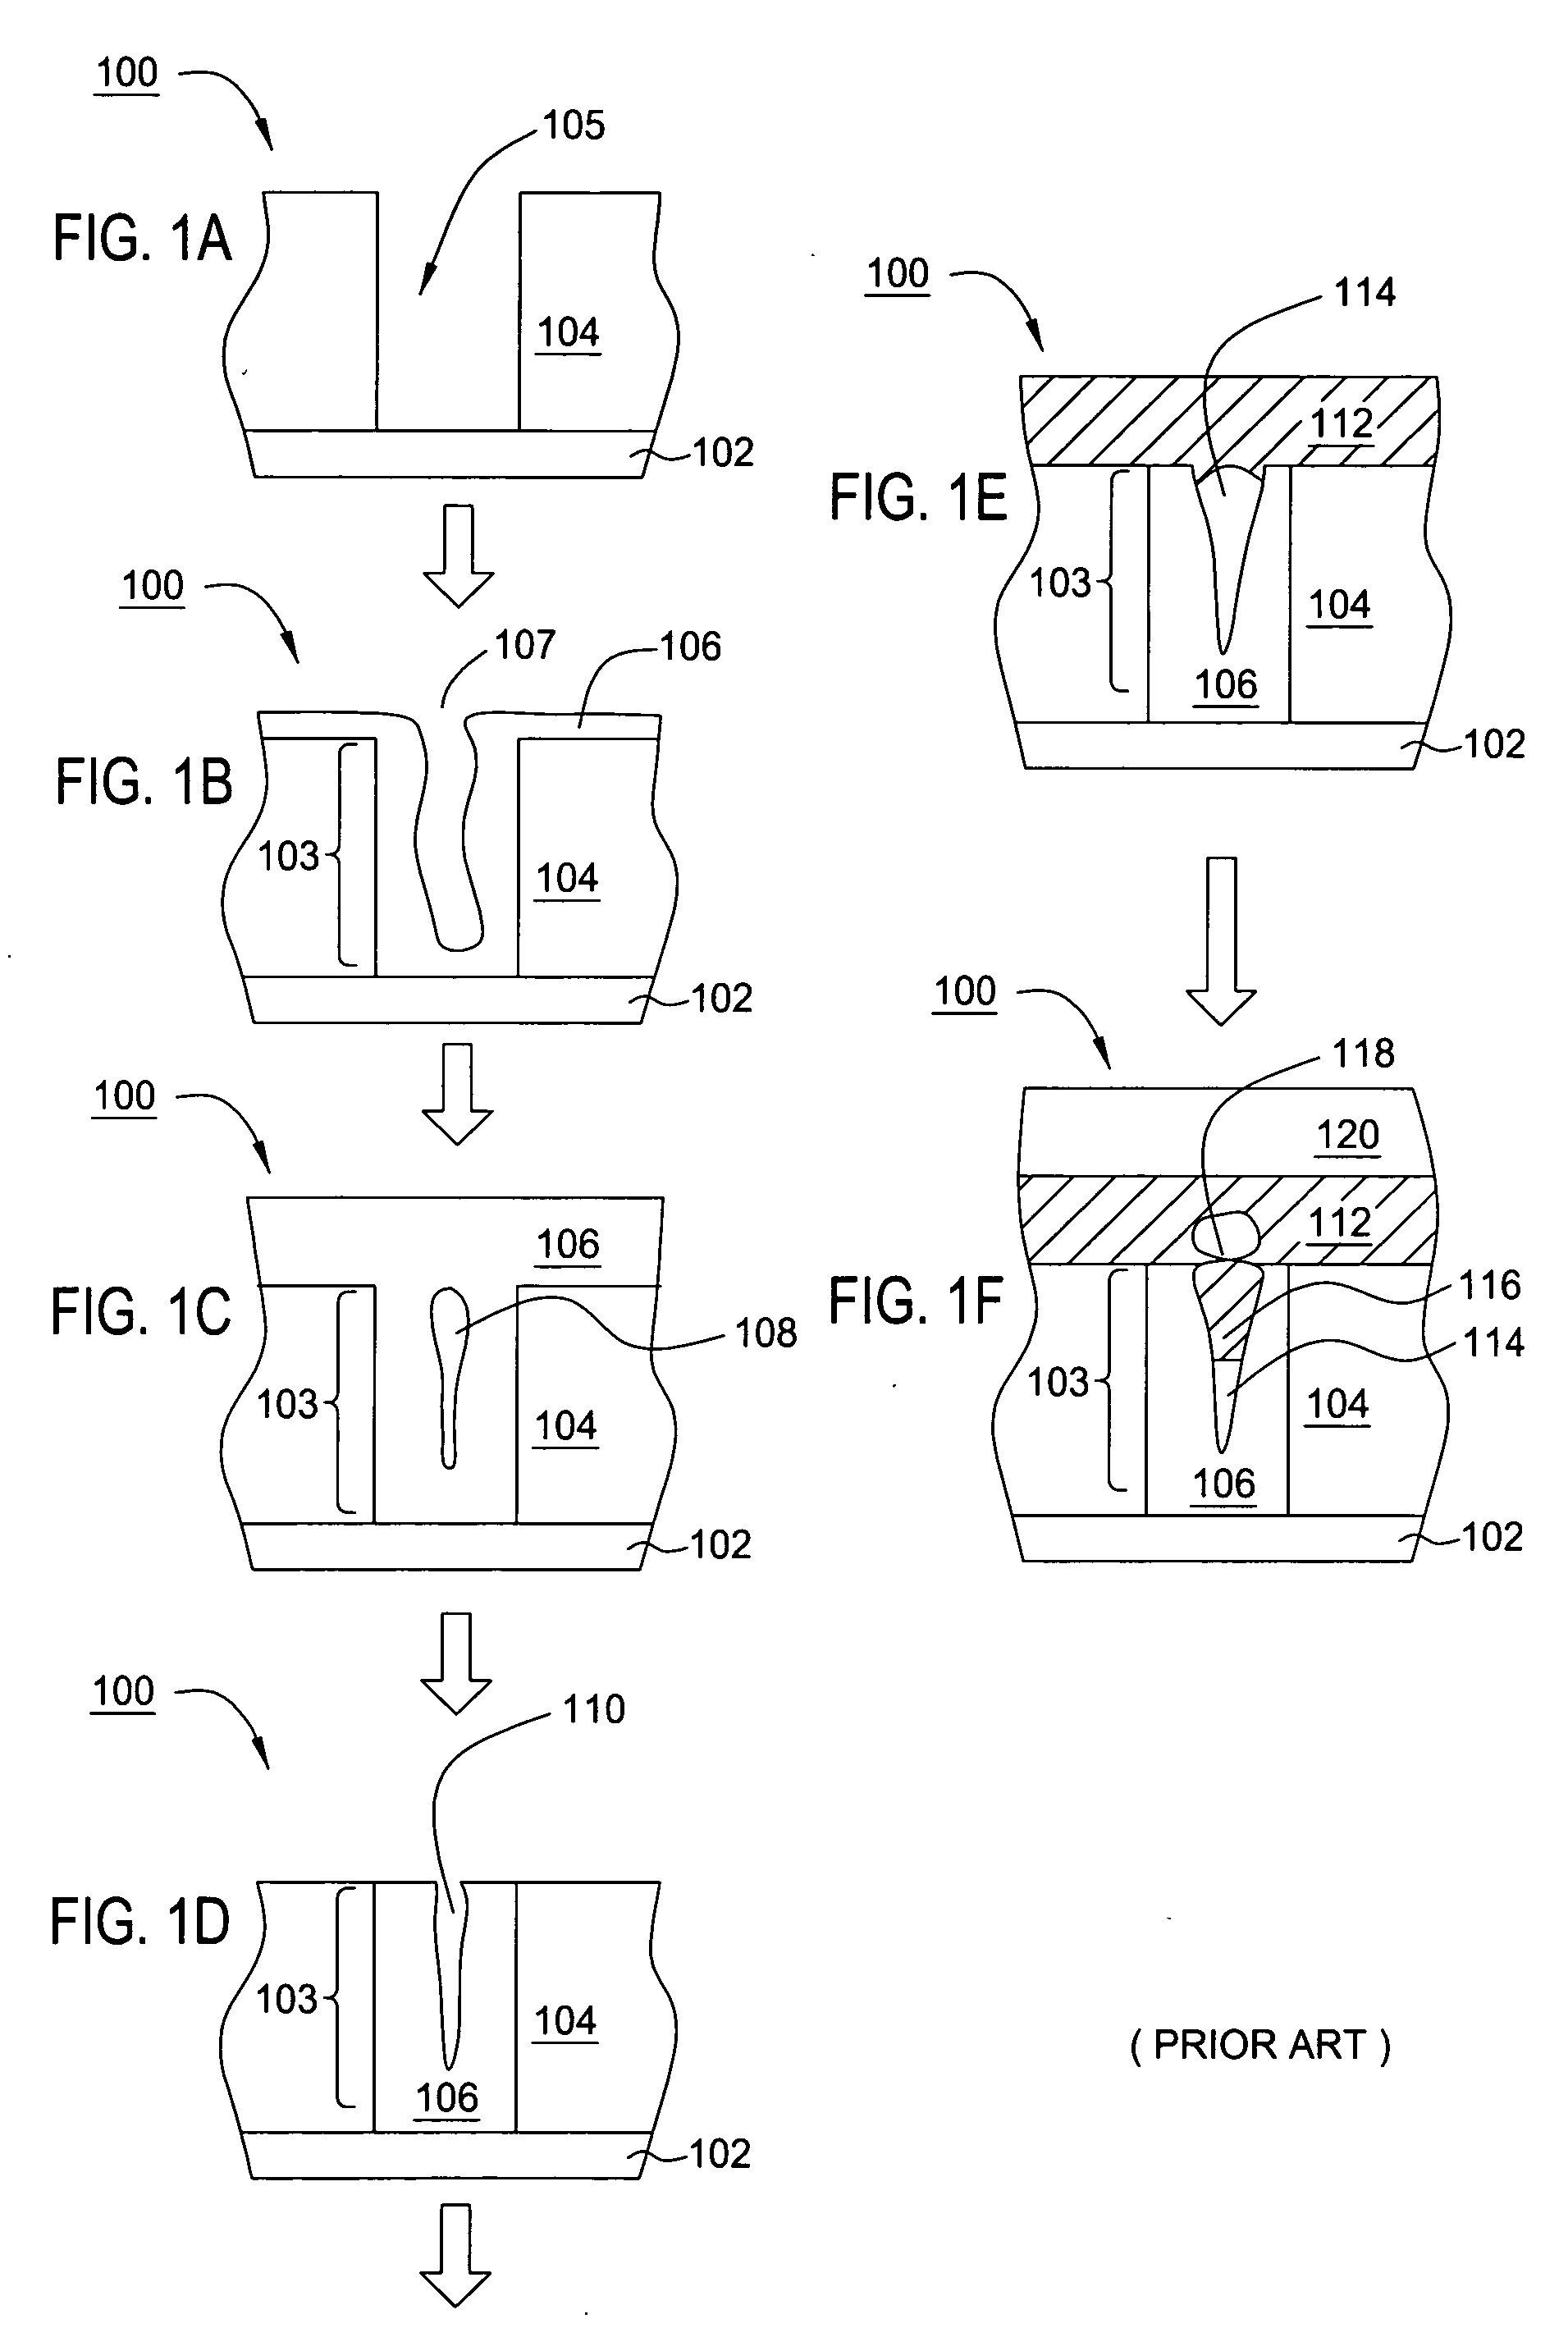 Electroless deposition process on a silicon contact